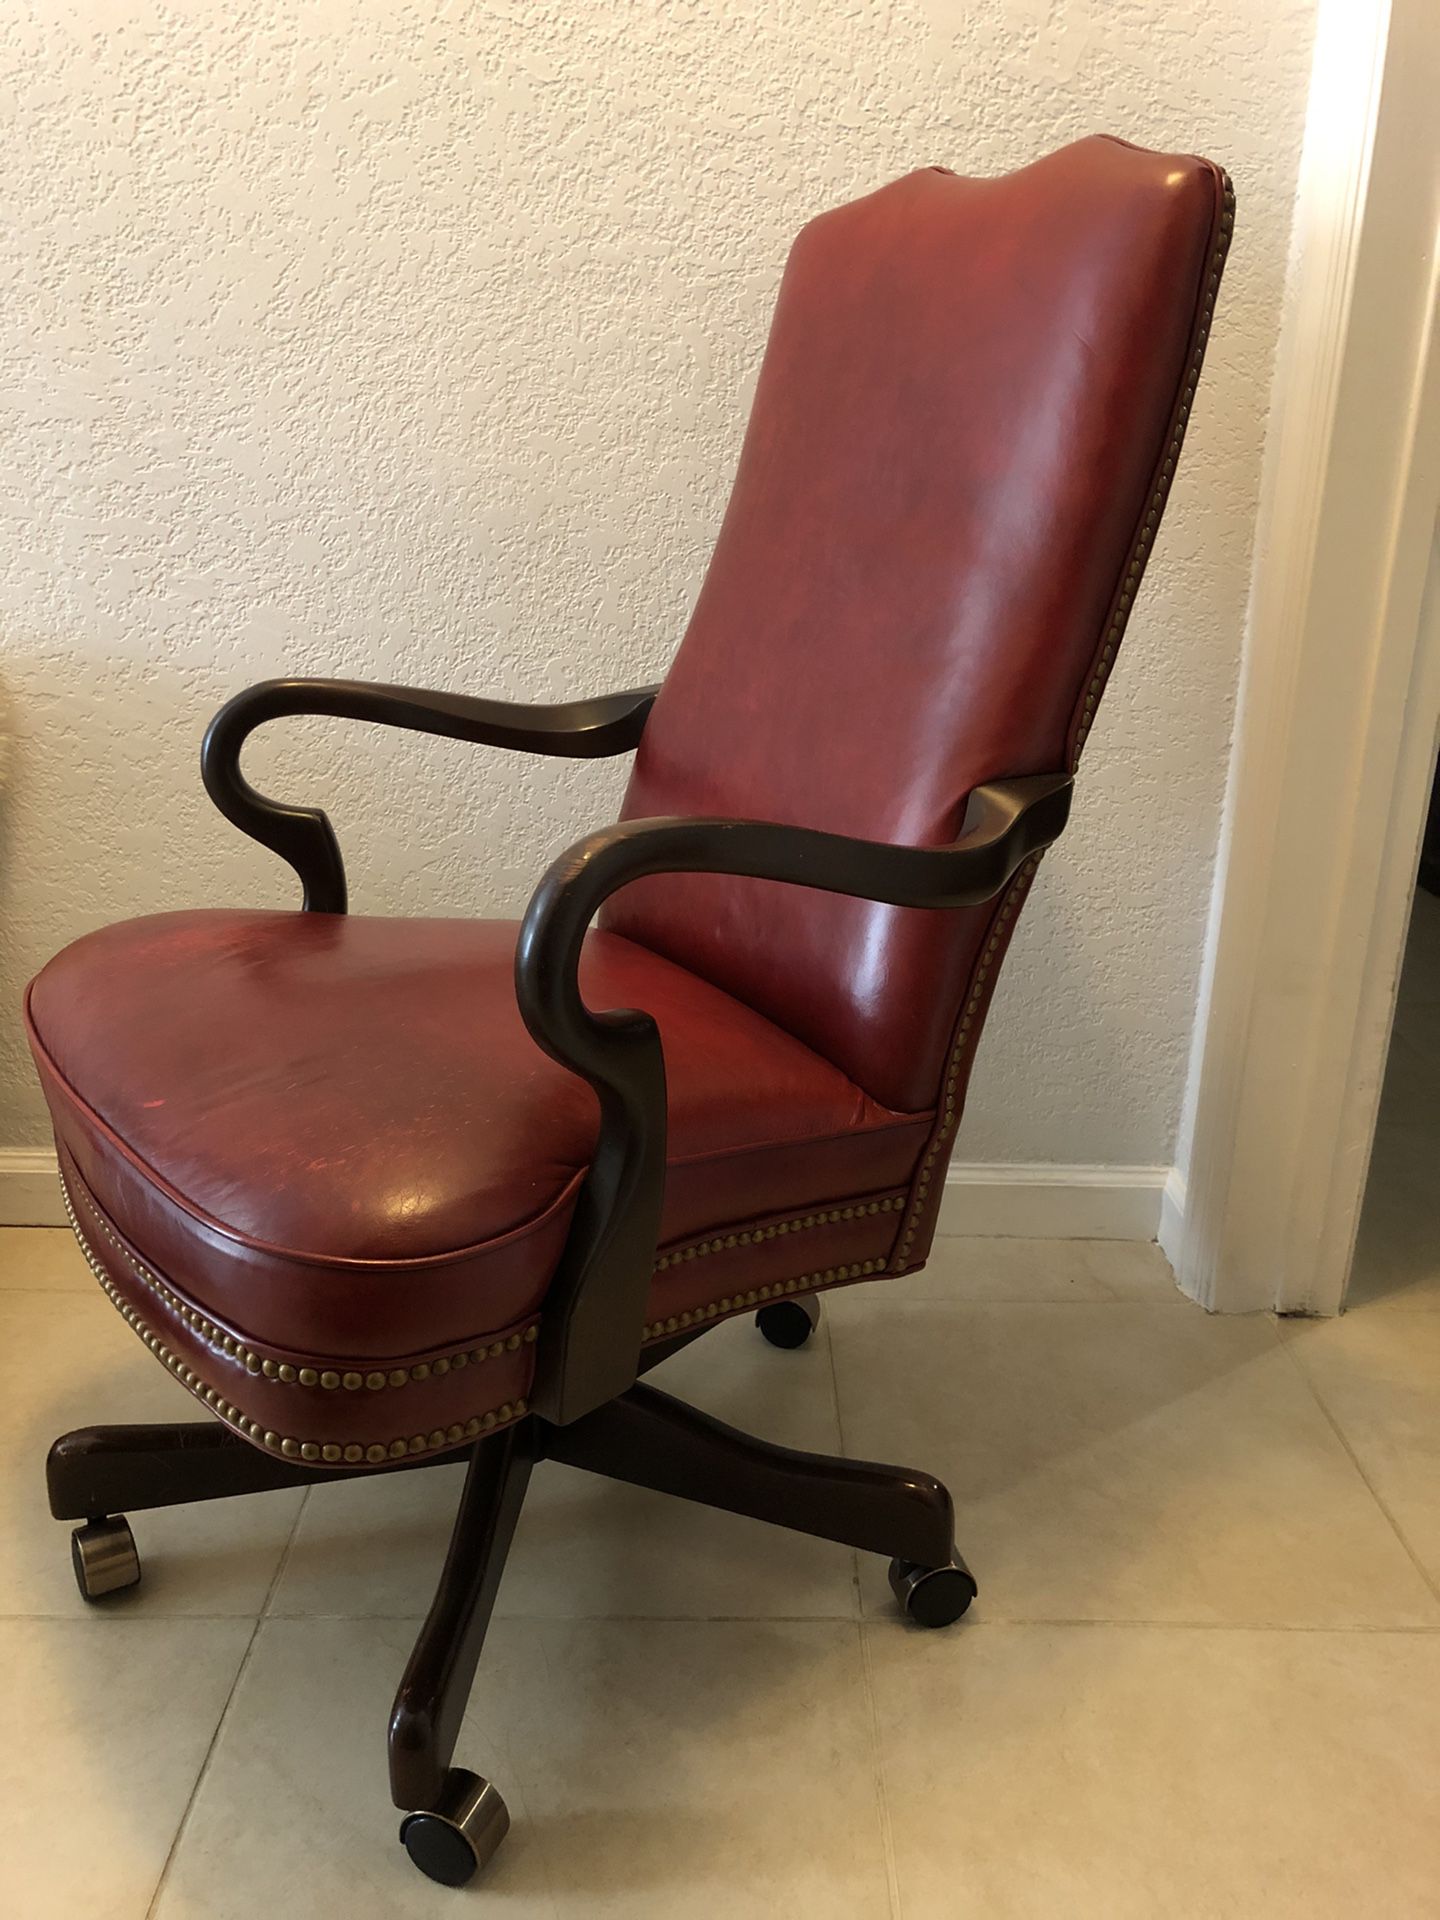 Executive desk chair- red leather